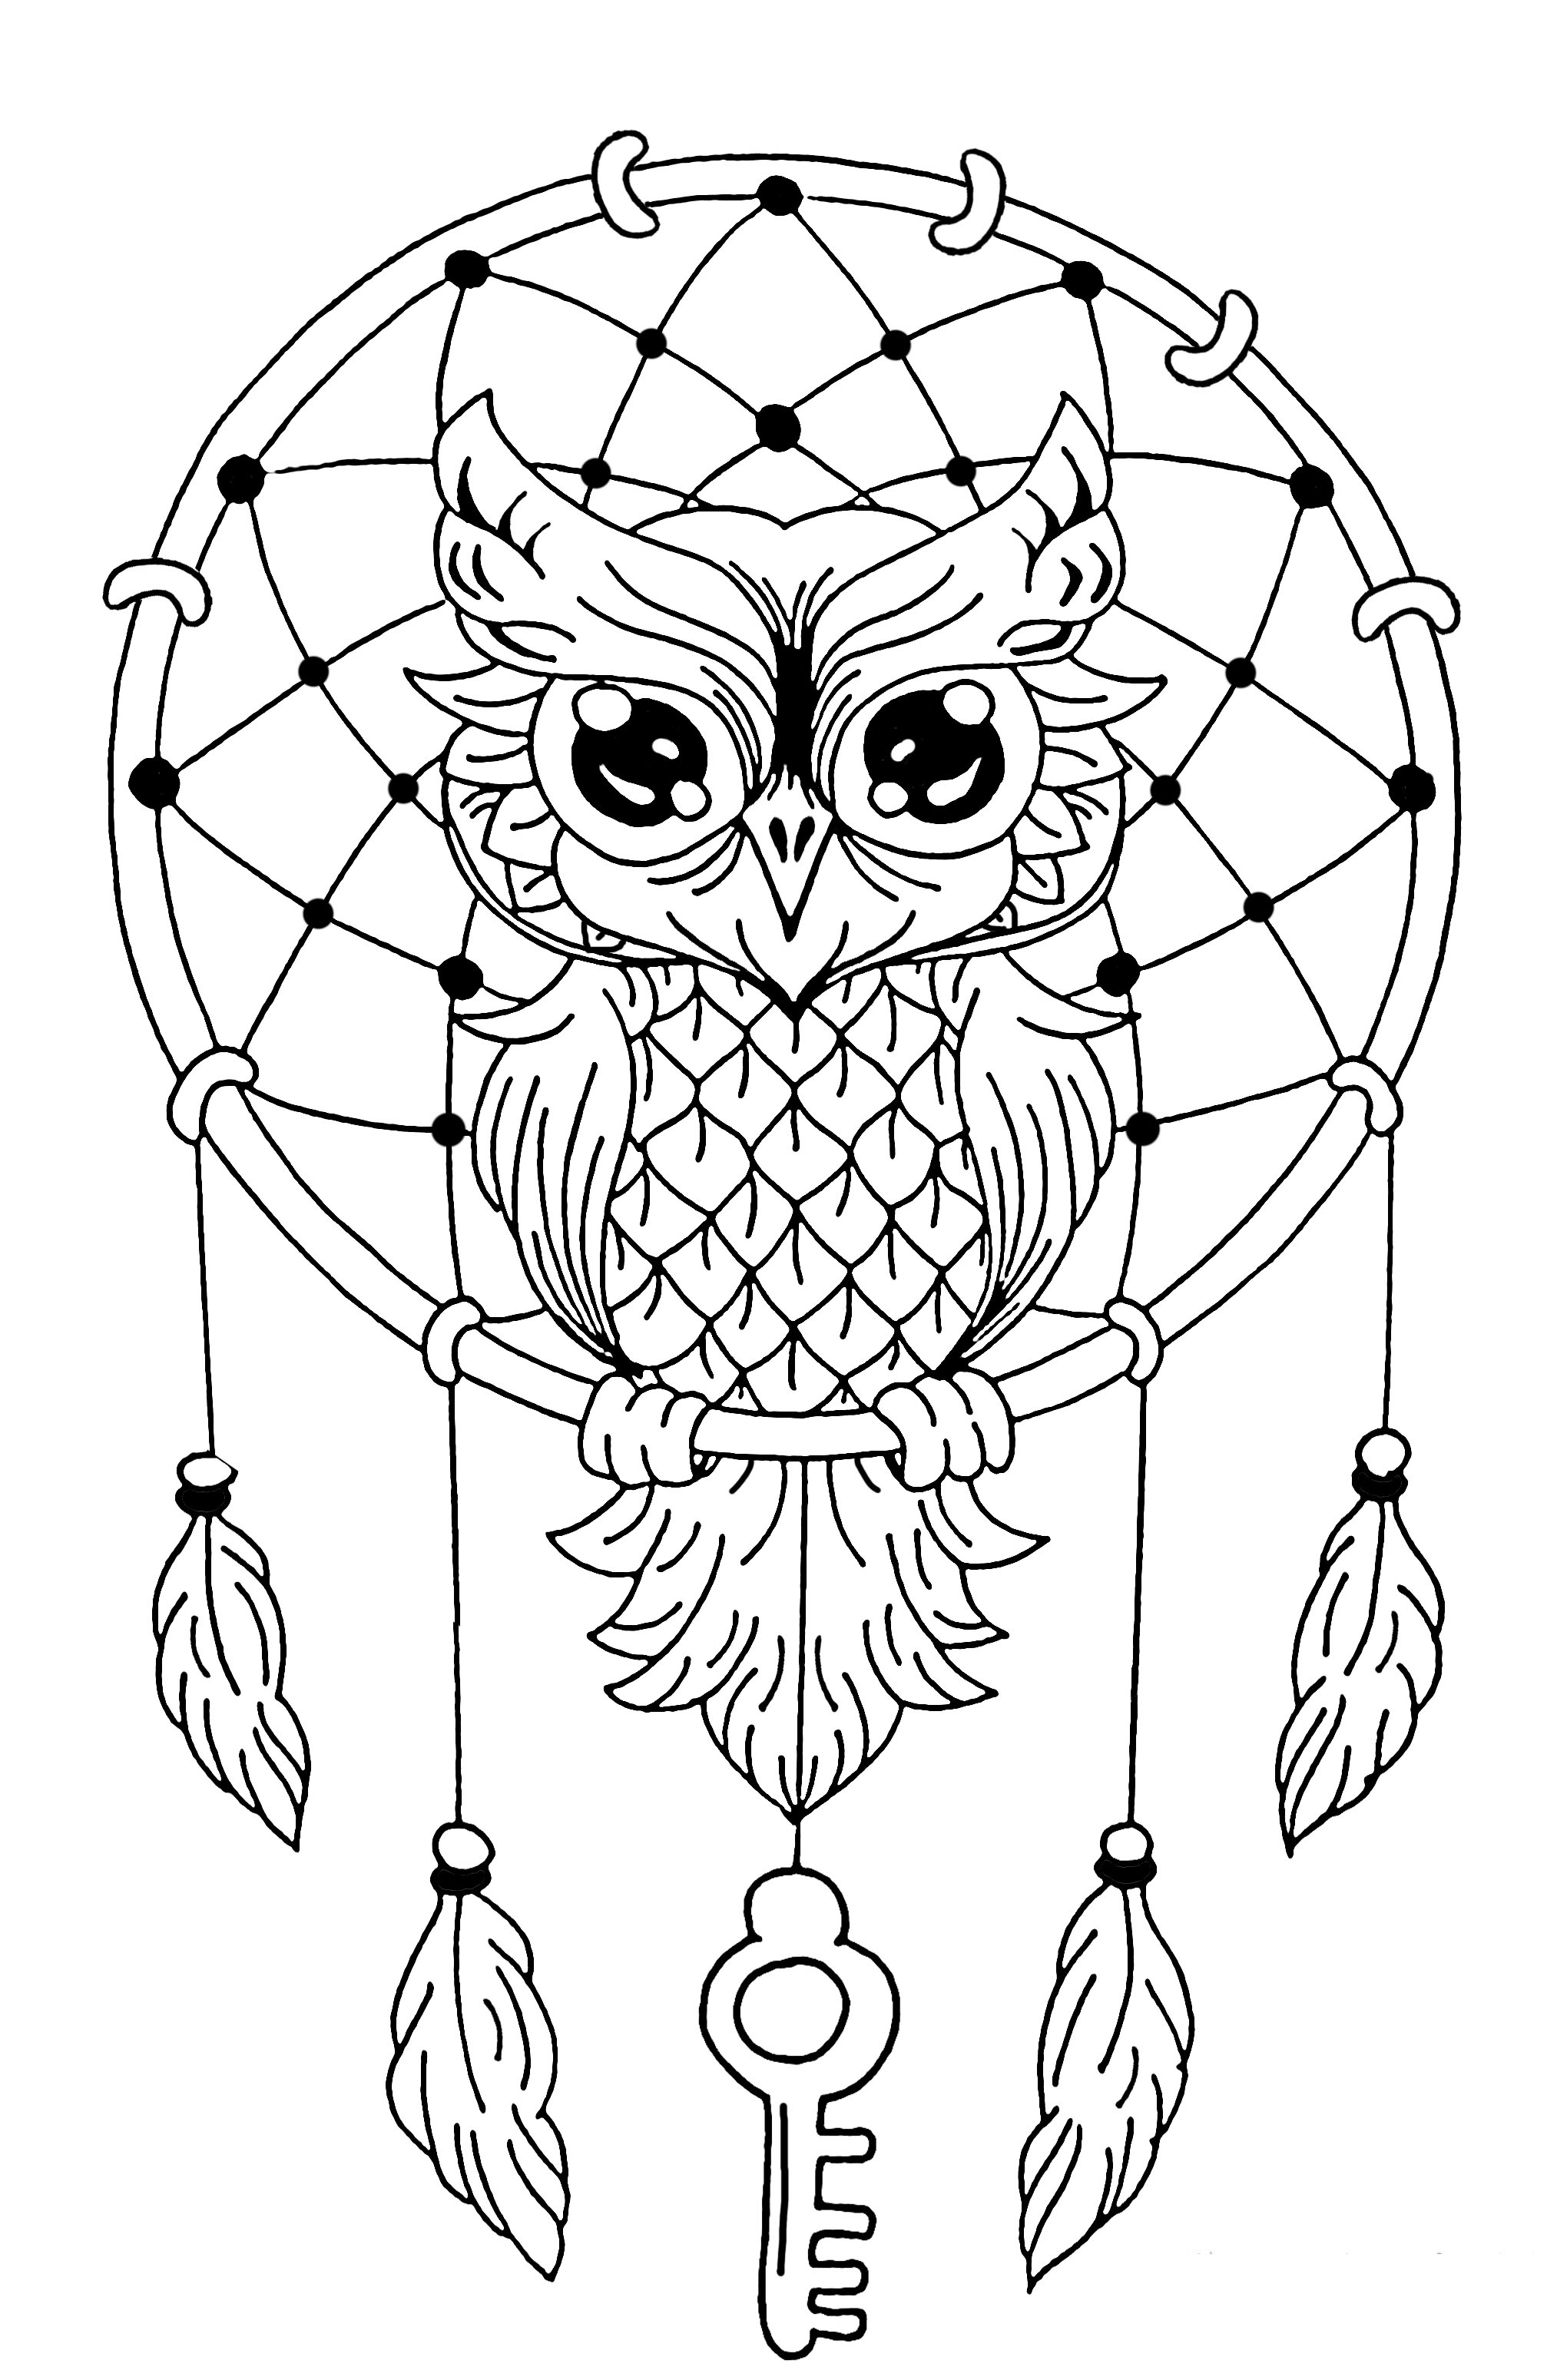 dream-catcher-coloring-pages-best-coloring-pages-for-kids